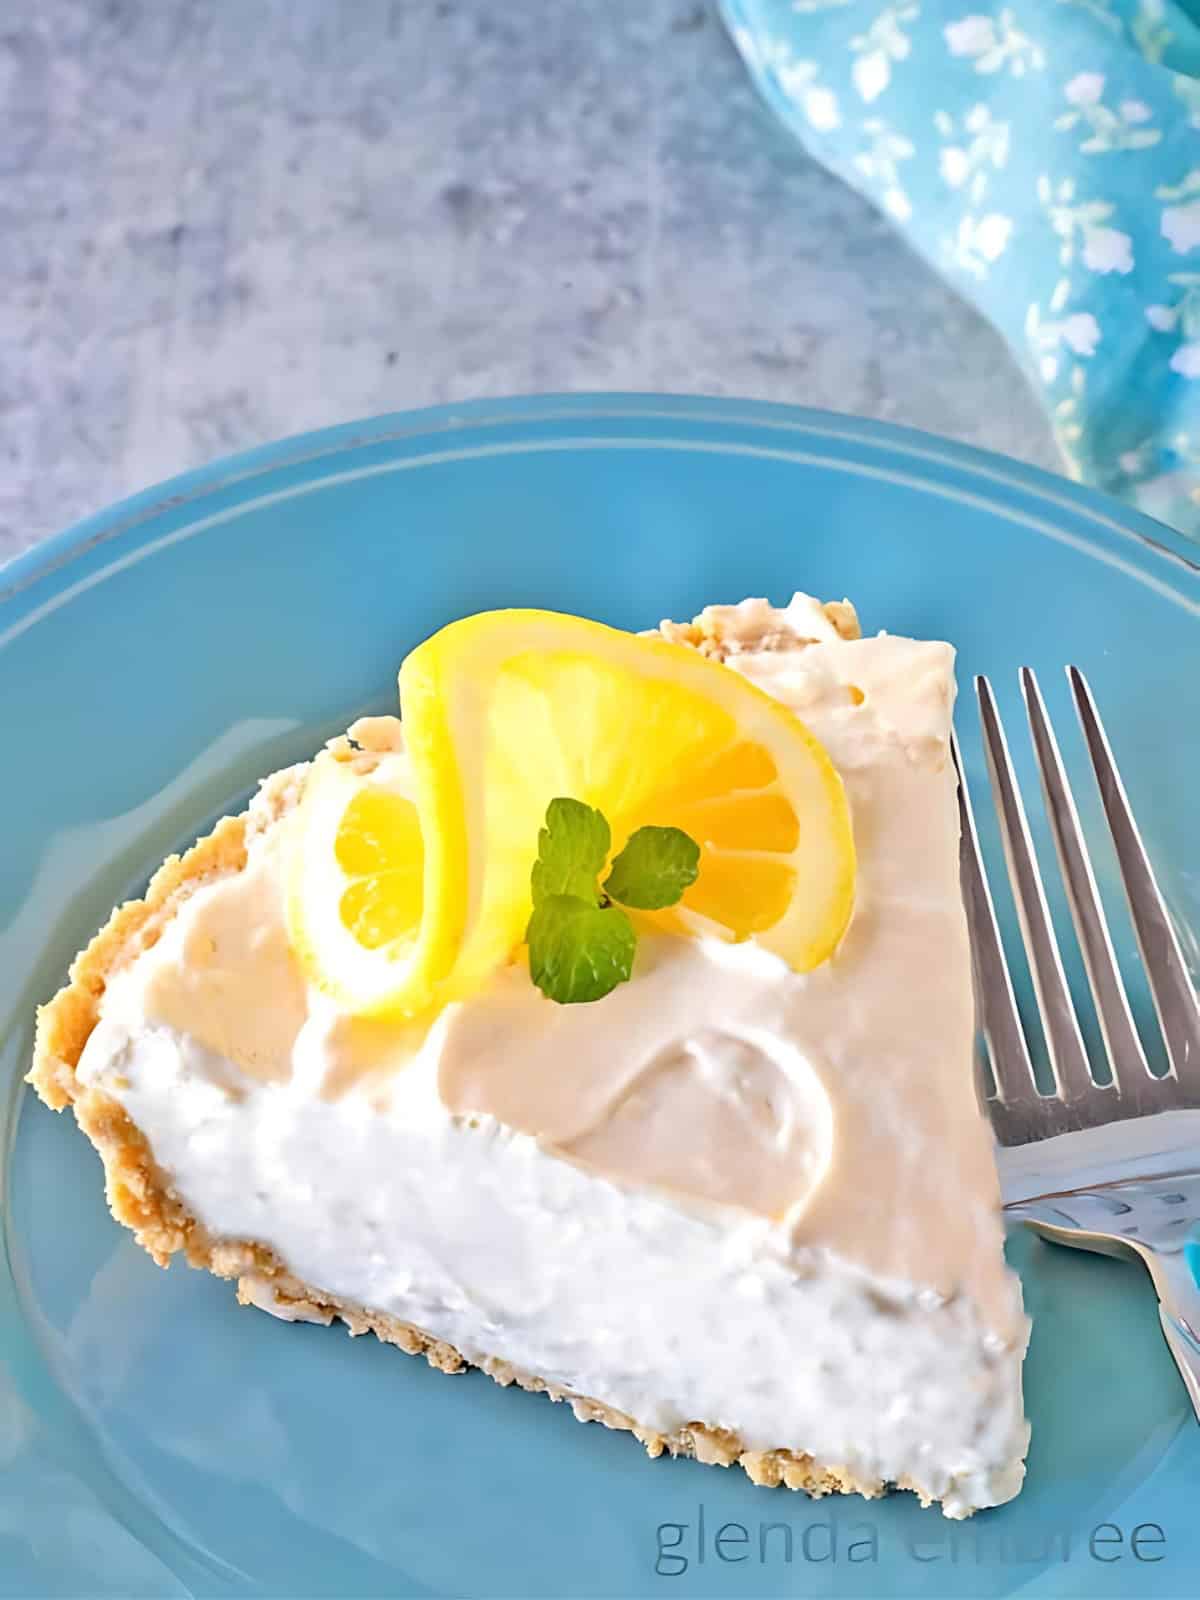 A lemonade pie topped with a swirl of cream, garnished with a slice of lemon and a sprig of fresh herb.